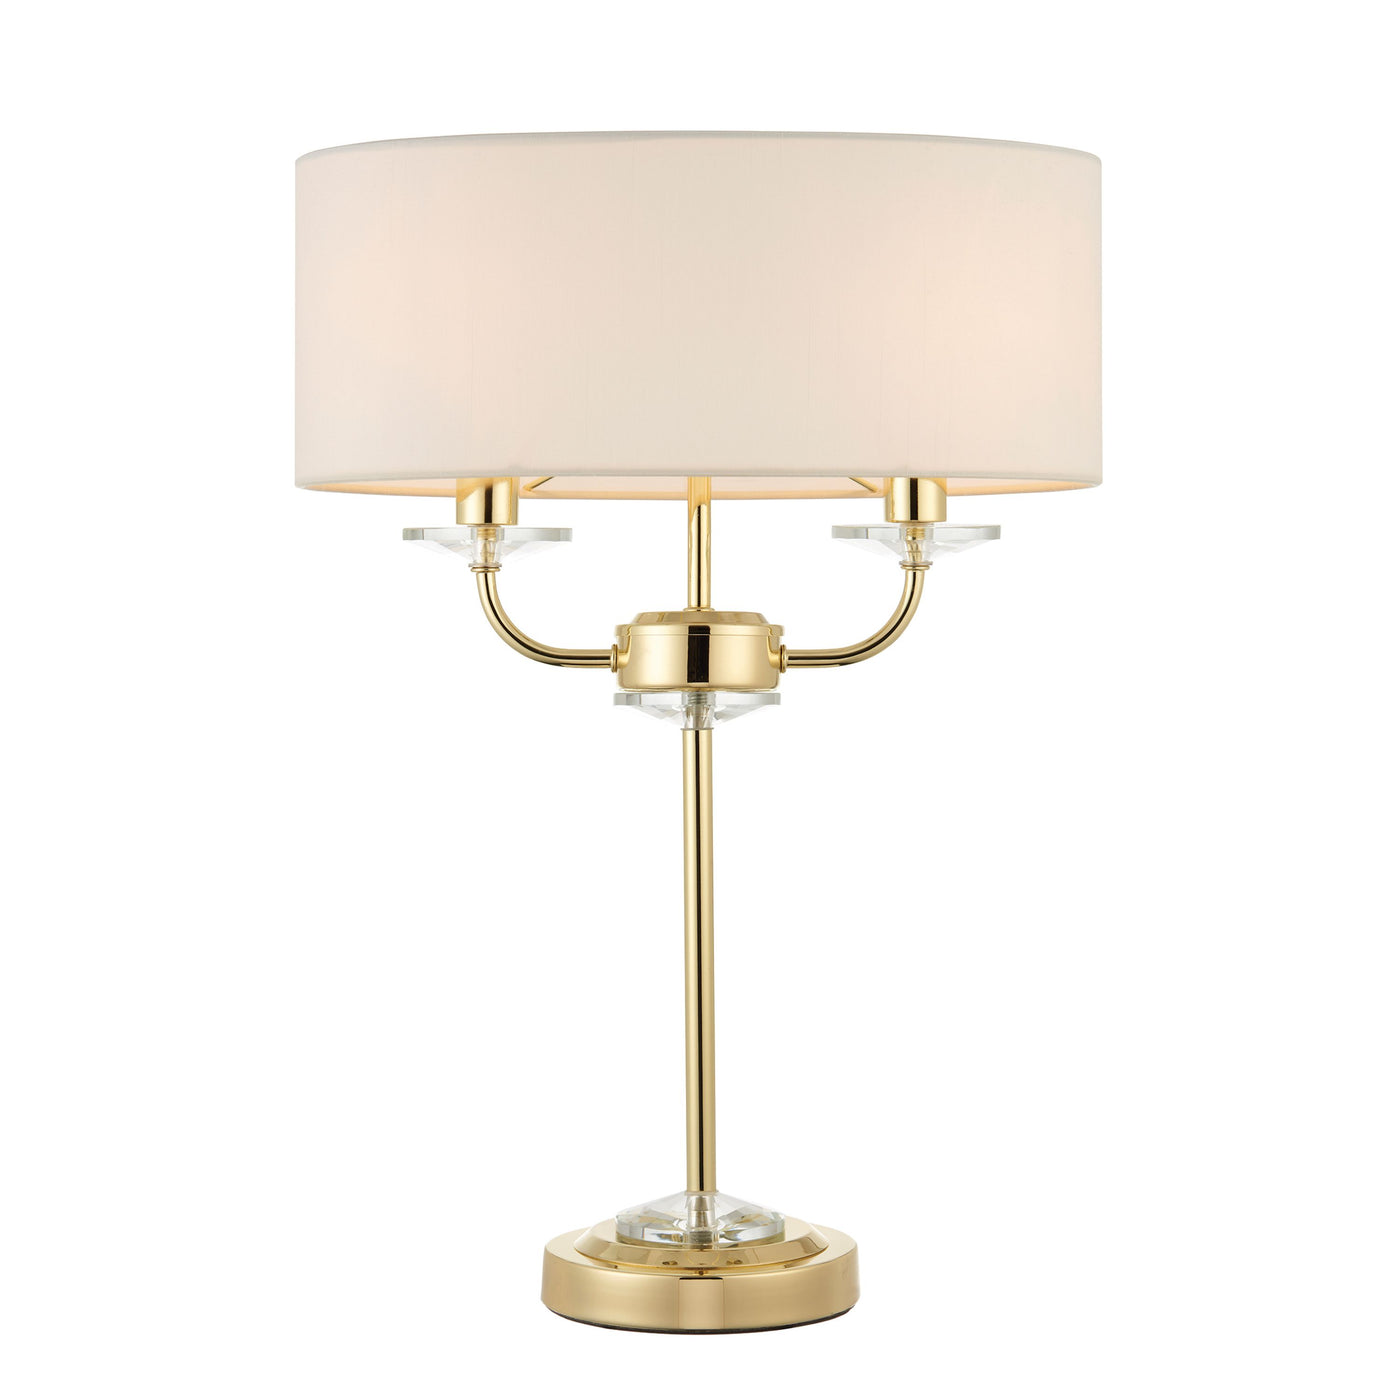 Eaclevedon Table Lamp Brass